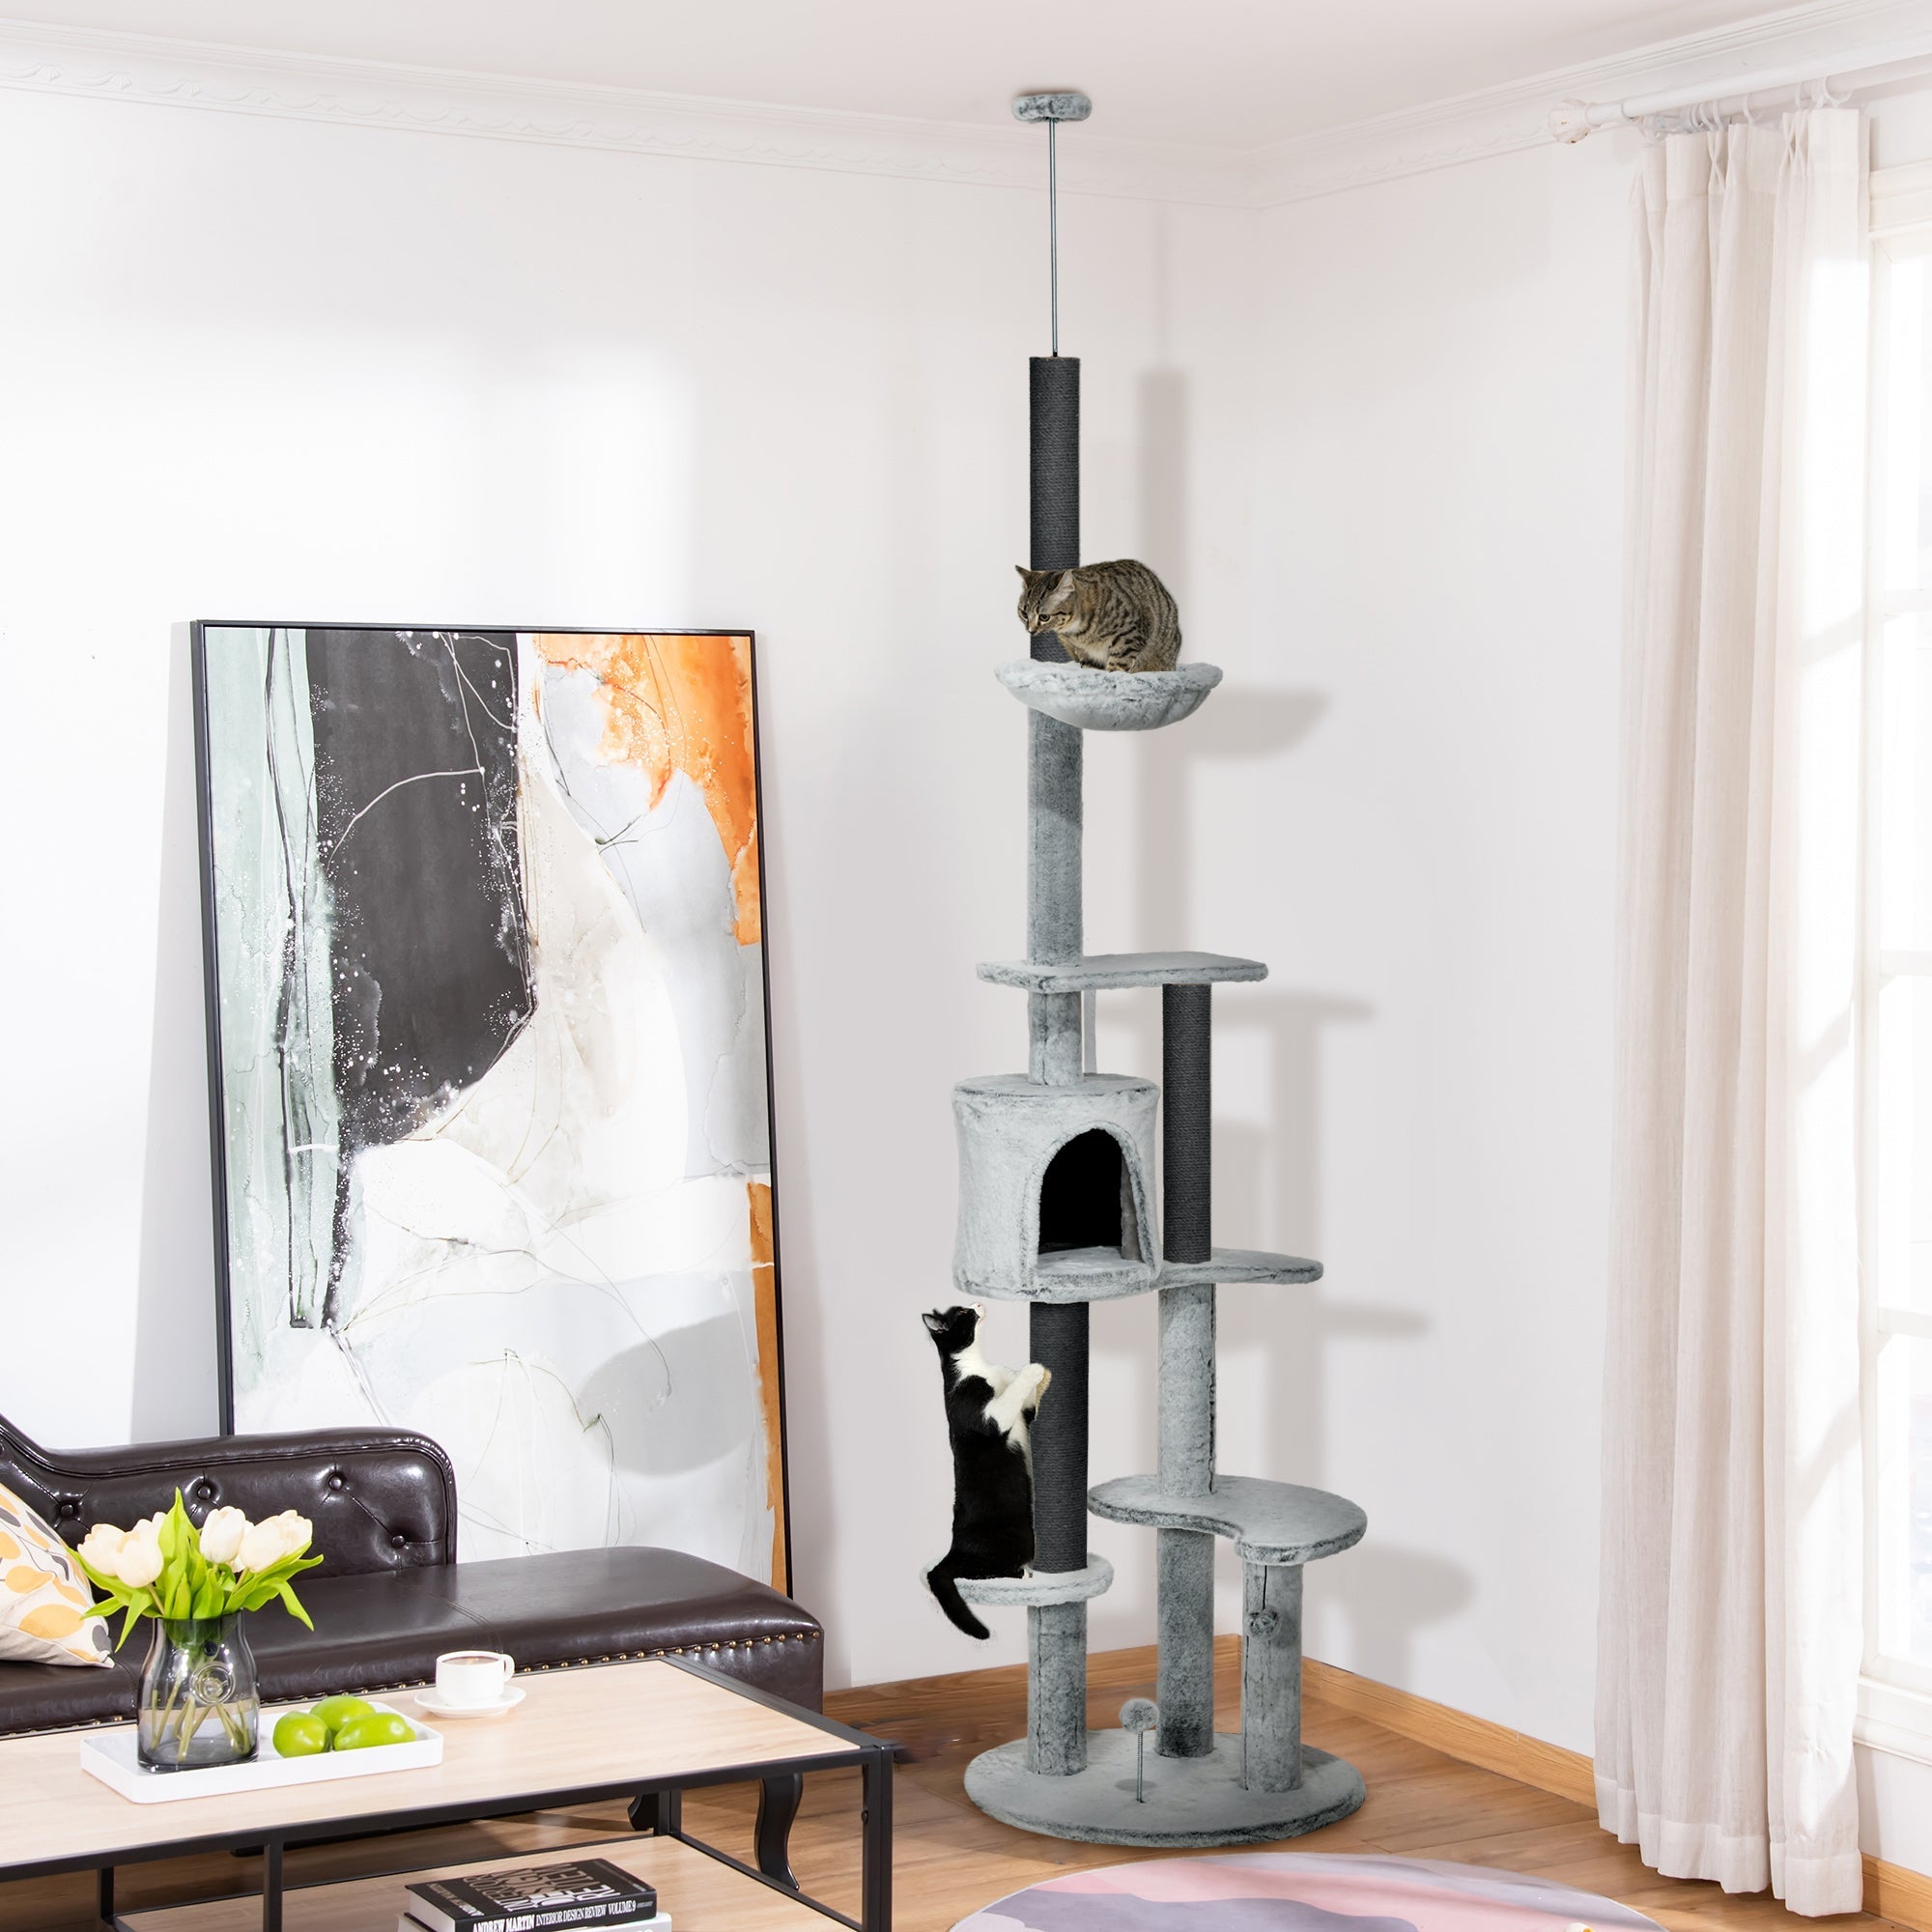 255cm Floor to Ceiling Cat Tree with Scratching Posts, Height Adjustable Cat Tower with Hammock, House, Anti-tipping Kit, Perches, Toys, Grey-1